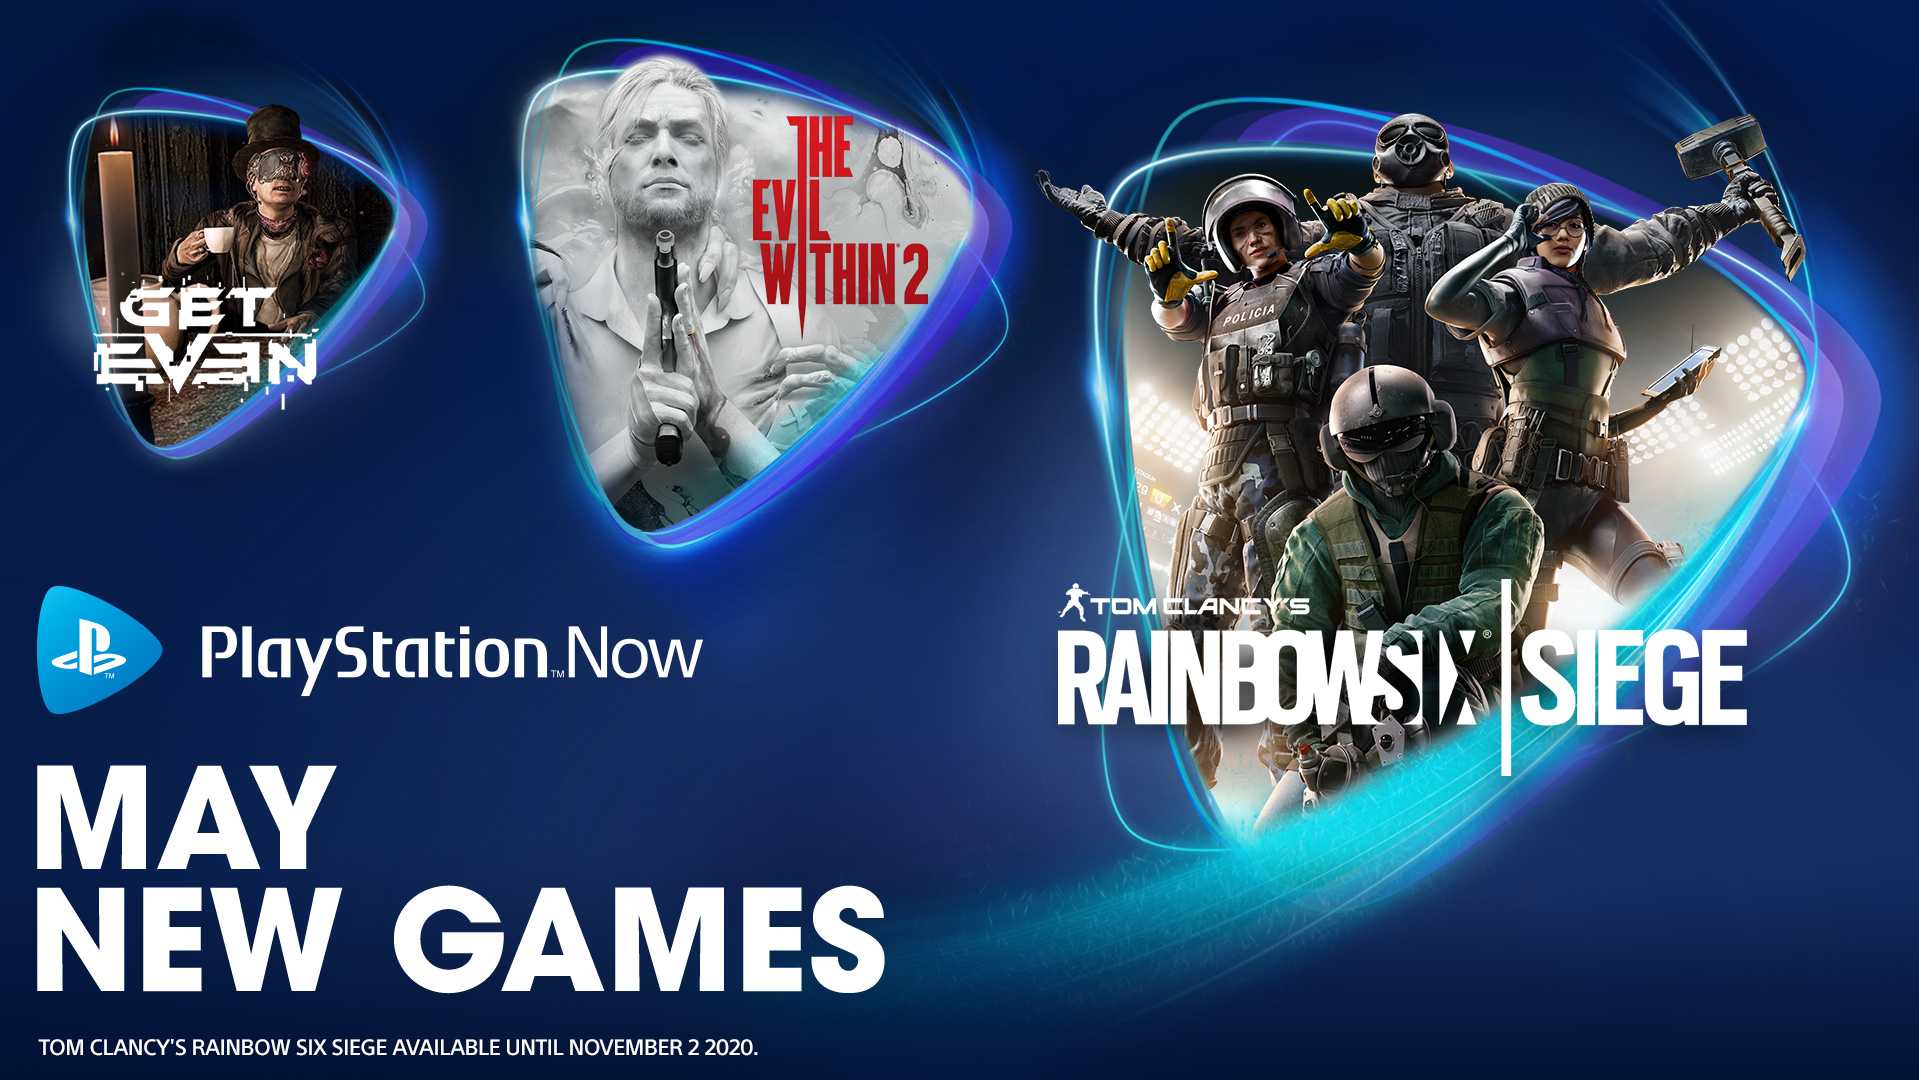 horror games on playstation now